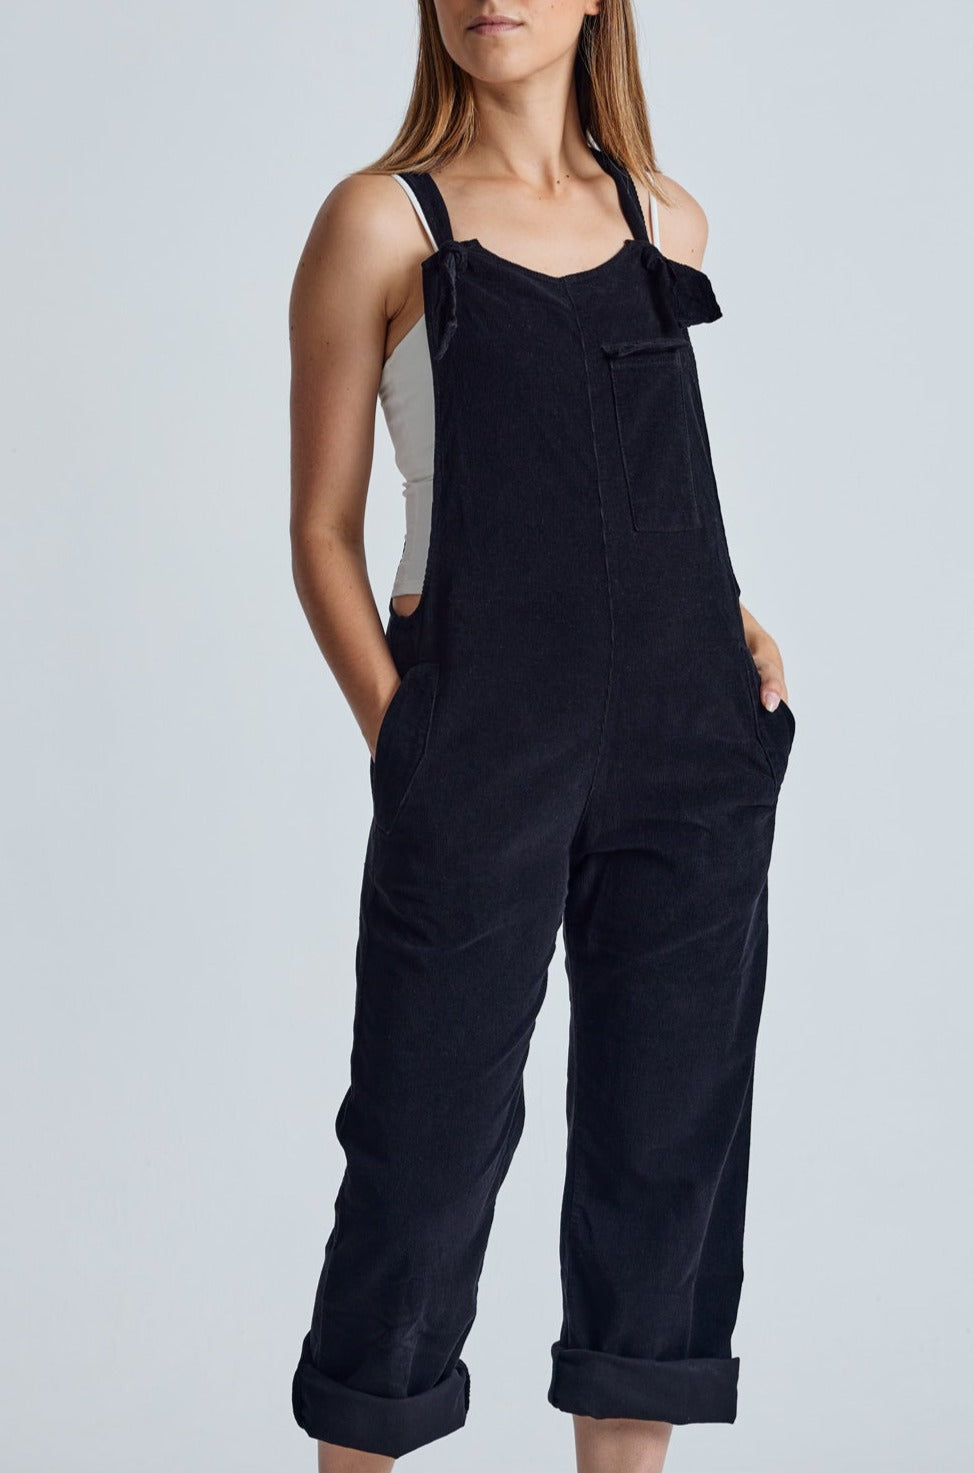 MARY-LOU Black - GOTS Organic Cotton Cord Dungarees by Flax & Loom, M